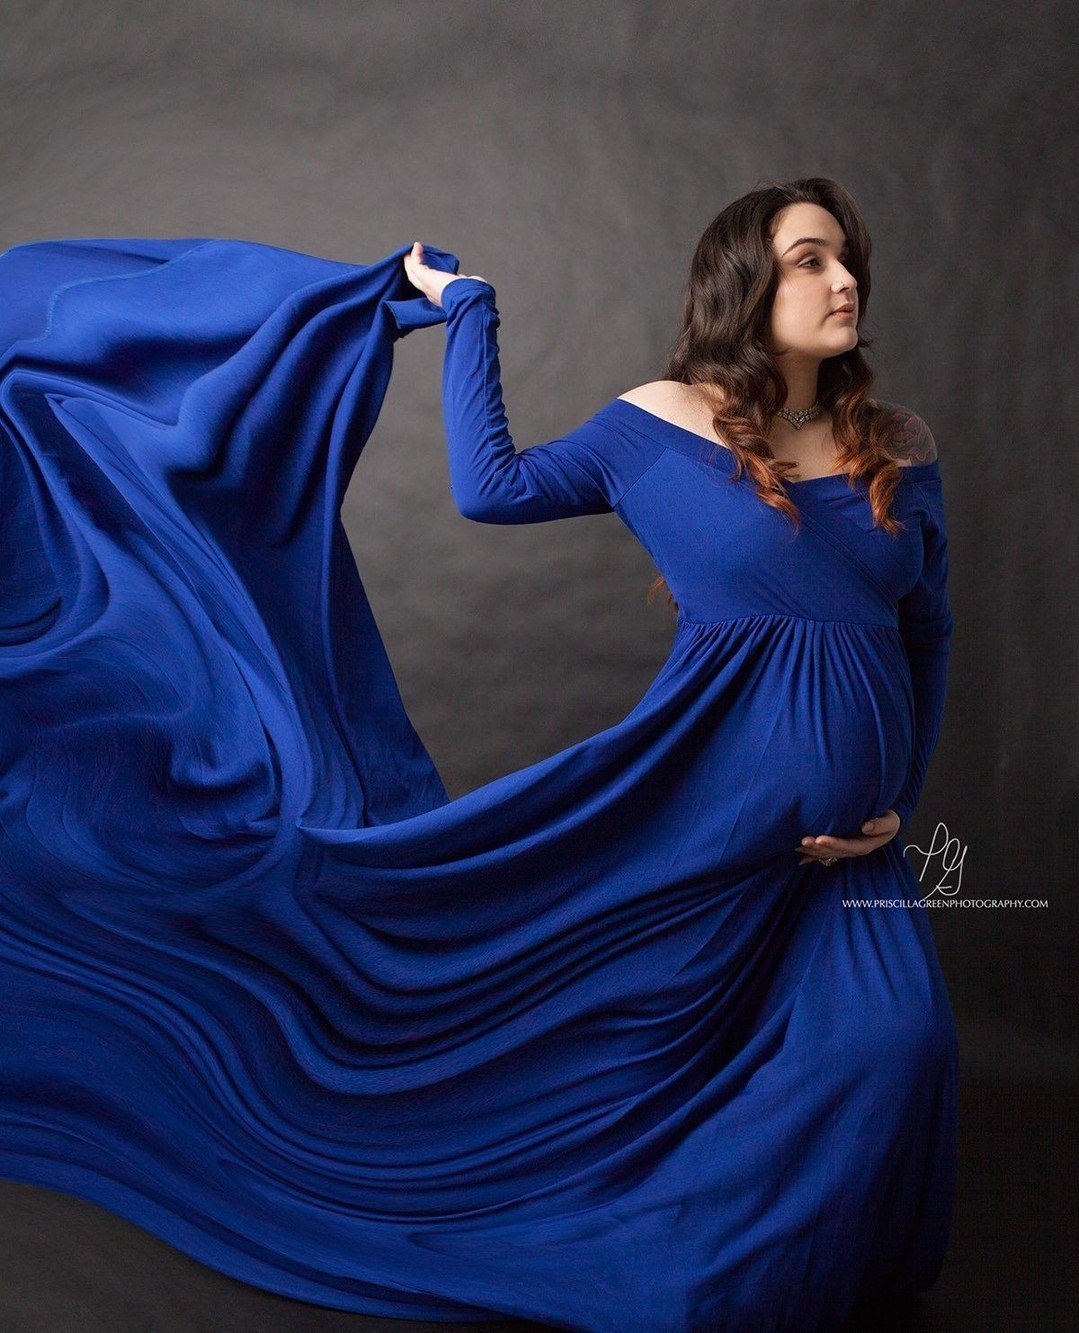 So many different possibilities in studio!⁠
Maternity dress available for our clients.⁠
⁠
Take a look on our website at our large collection of maternity gowns www.priscillagreenphotography.com click the menu &quot;information&quot; ➡️&quot;studio dr